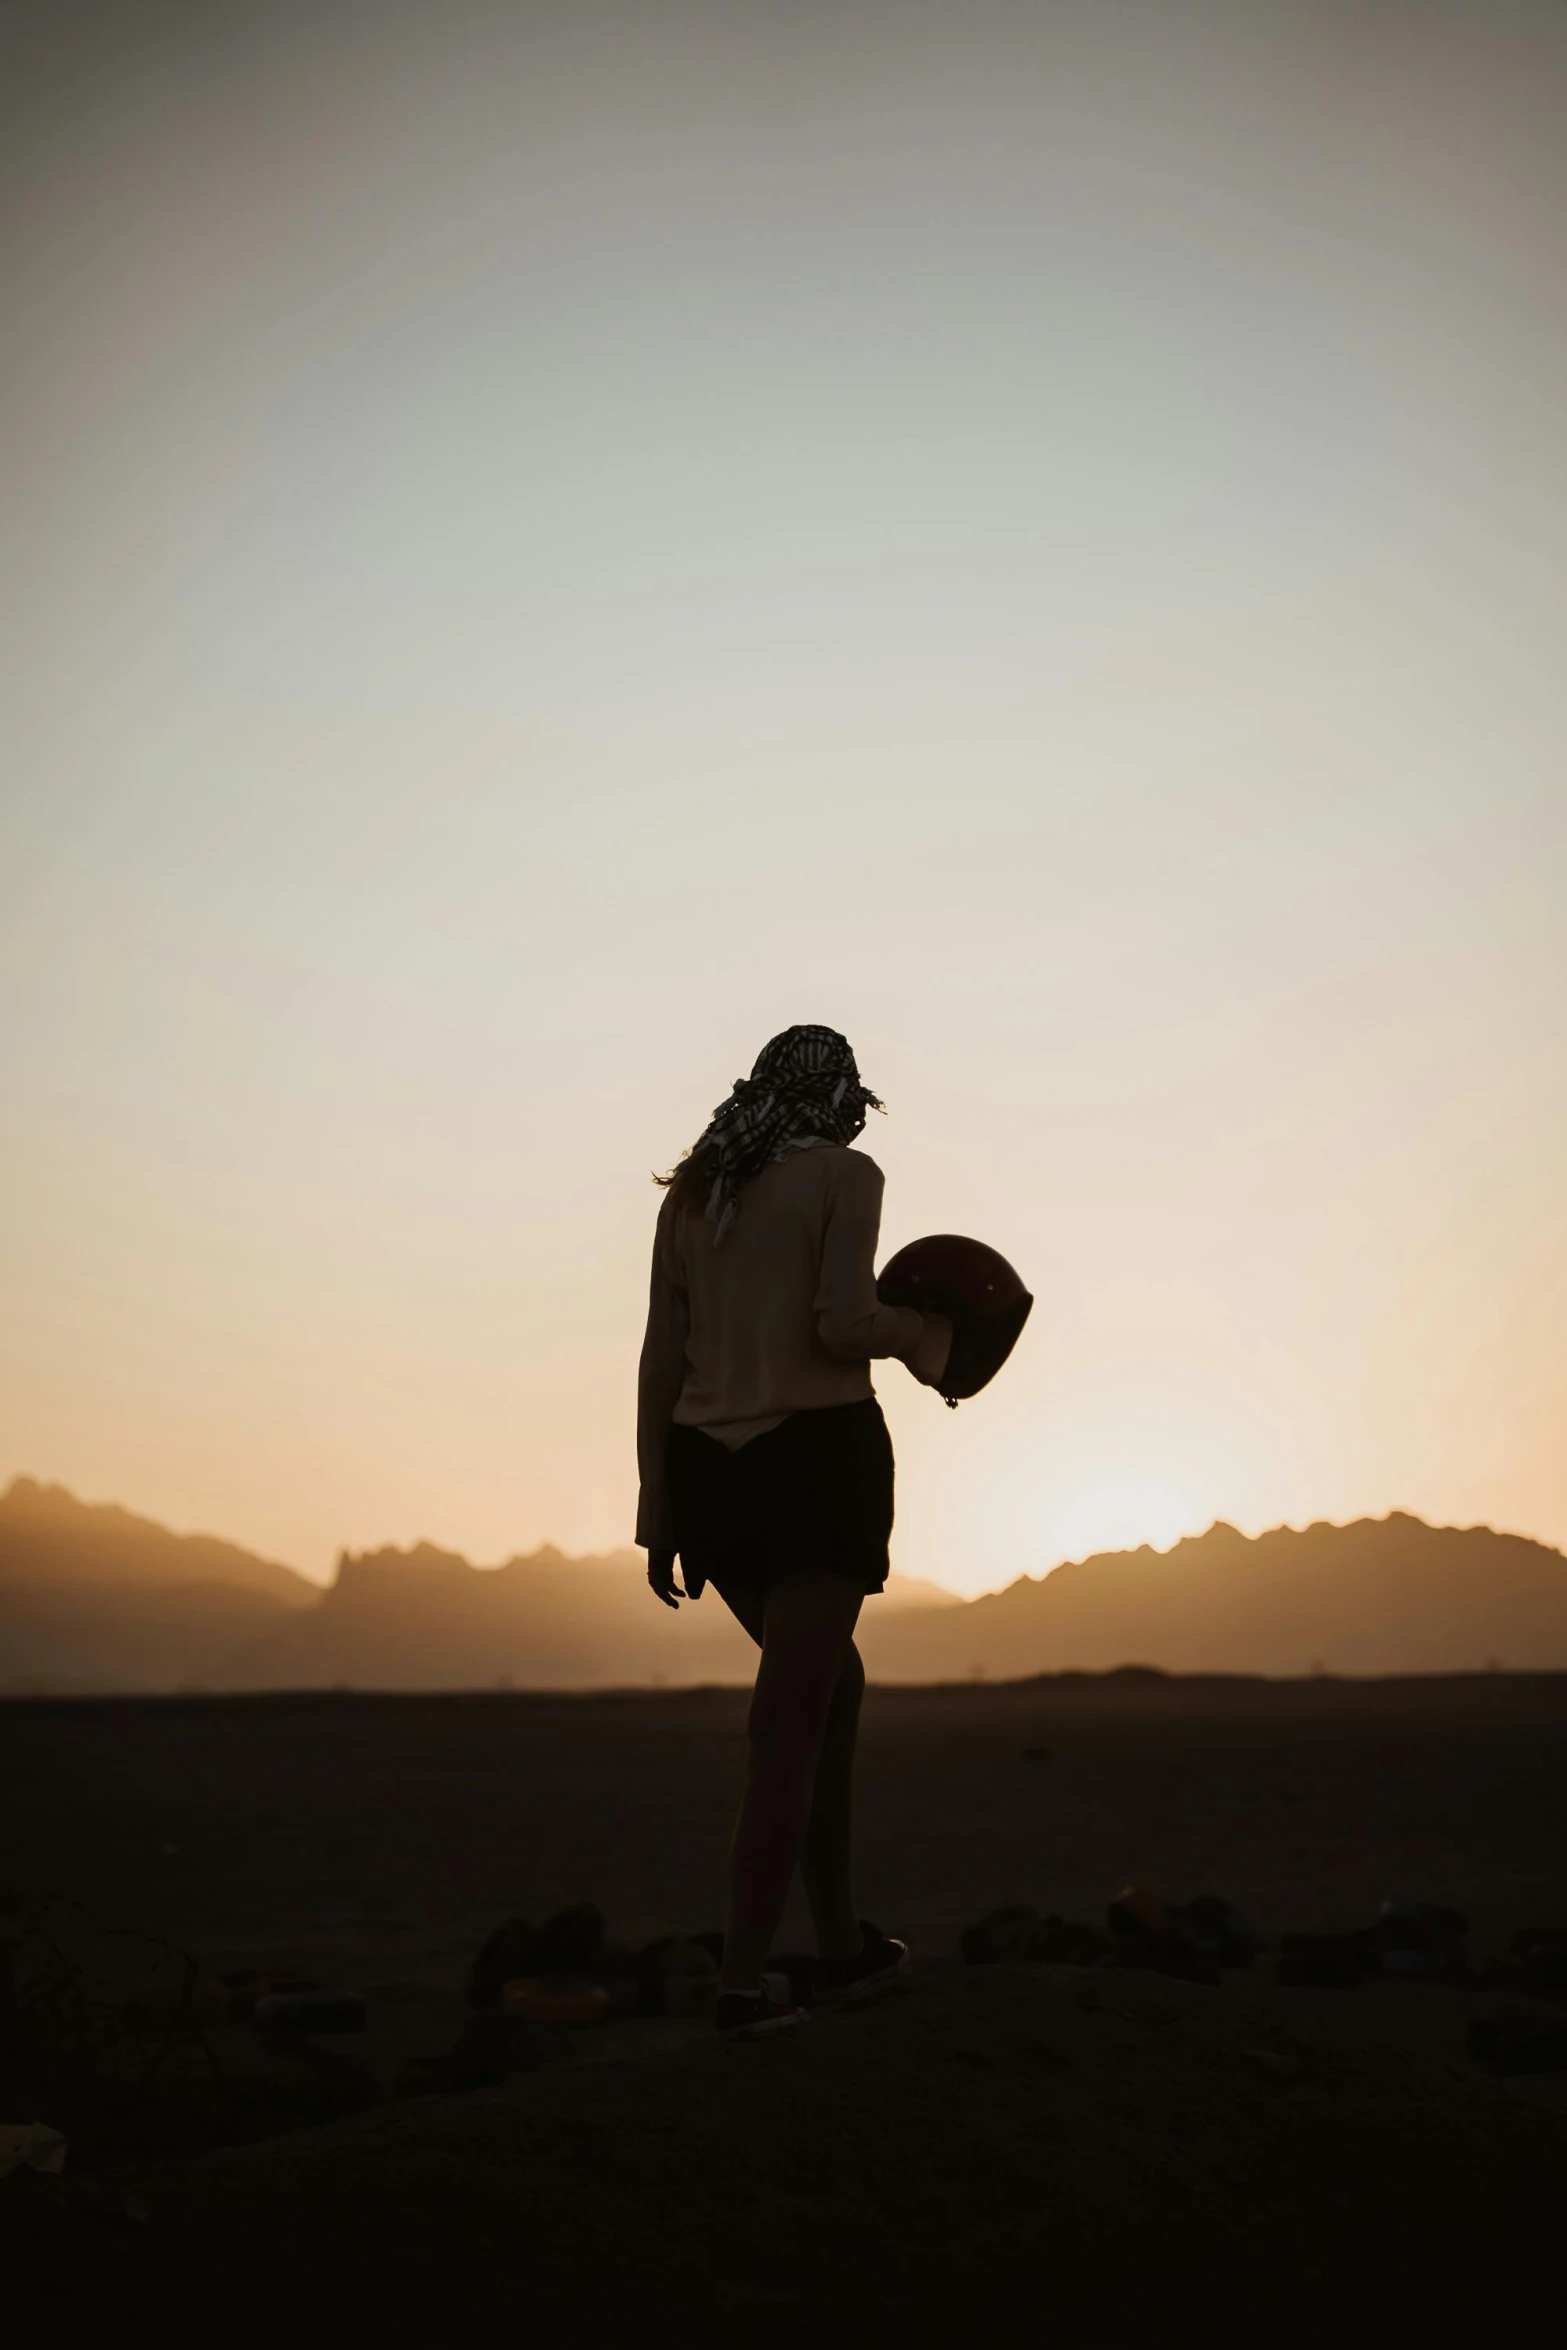 a person standing in the middle of a desert, holding helmet, ((sunset)), woman, trending photo